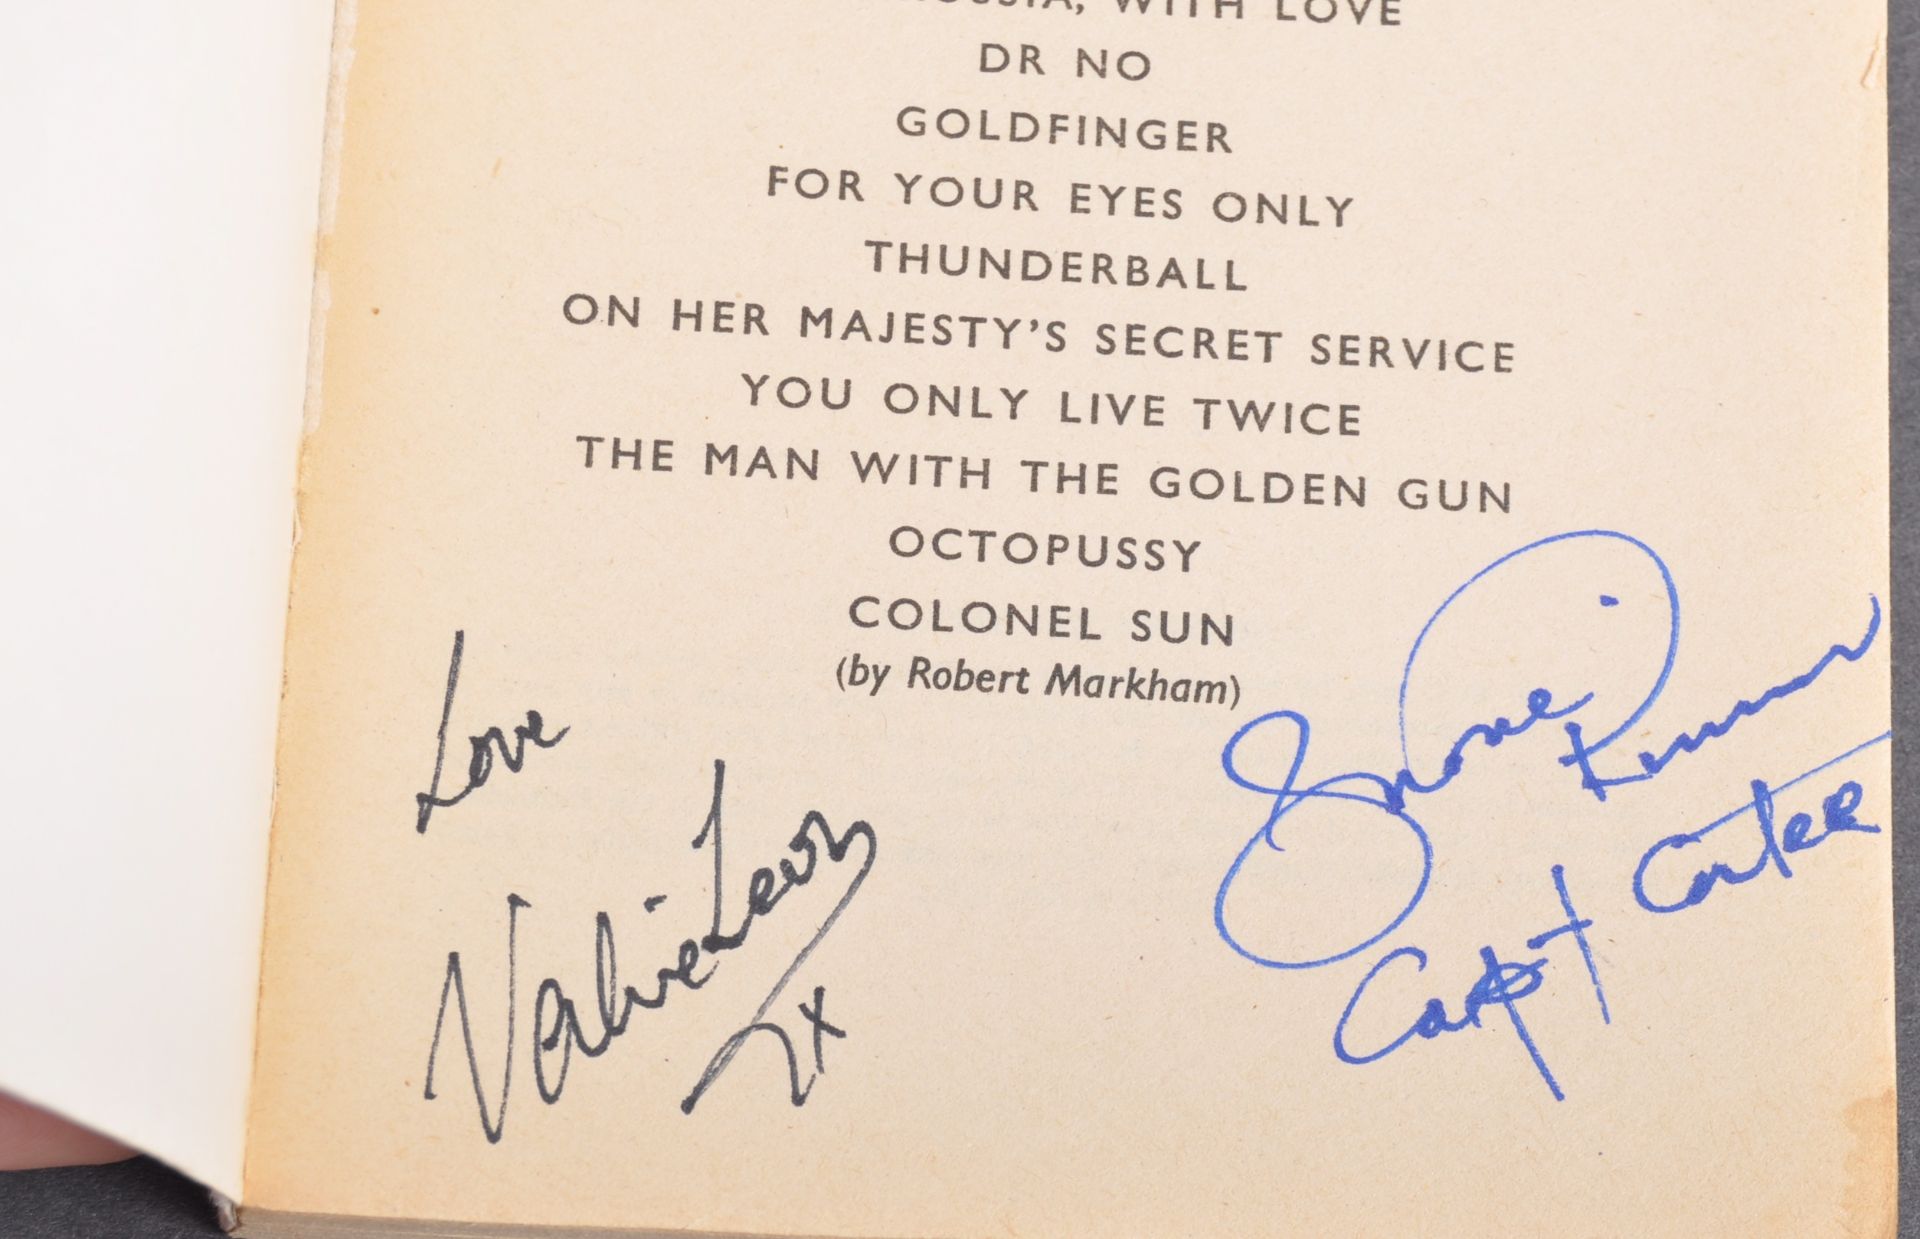 FROM THE COLLECTION OF VALERIE LEON - SIGNED JAMES BOND 007 BOOK - Image 3 of 4